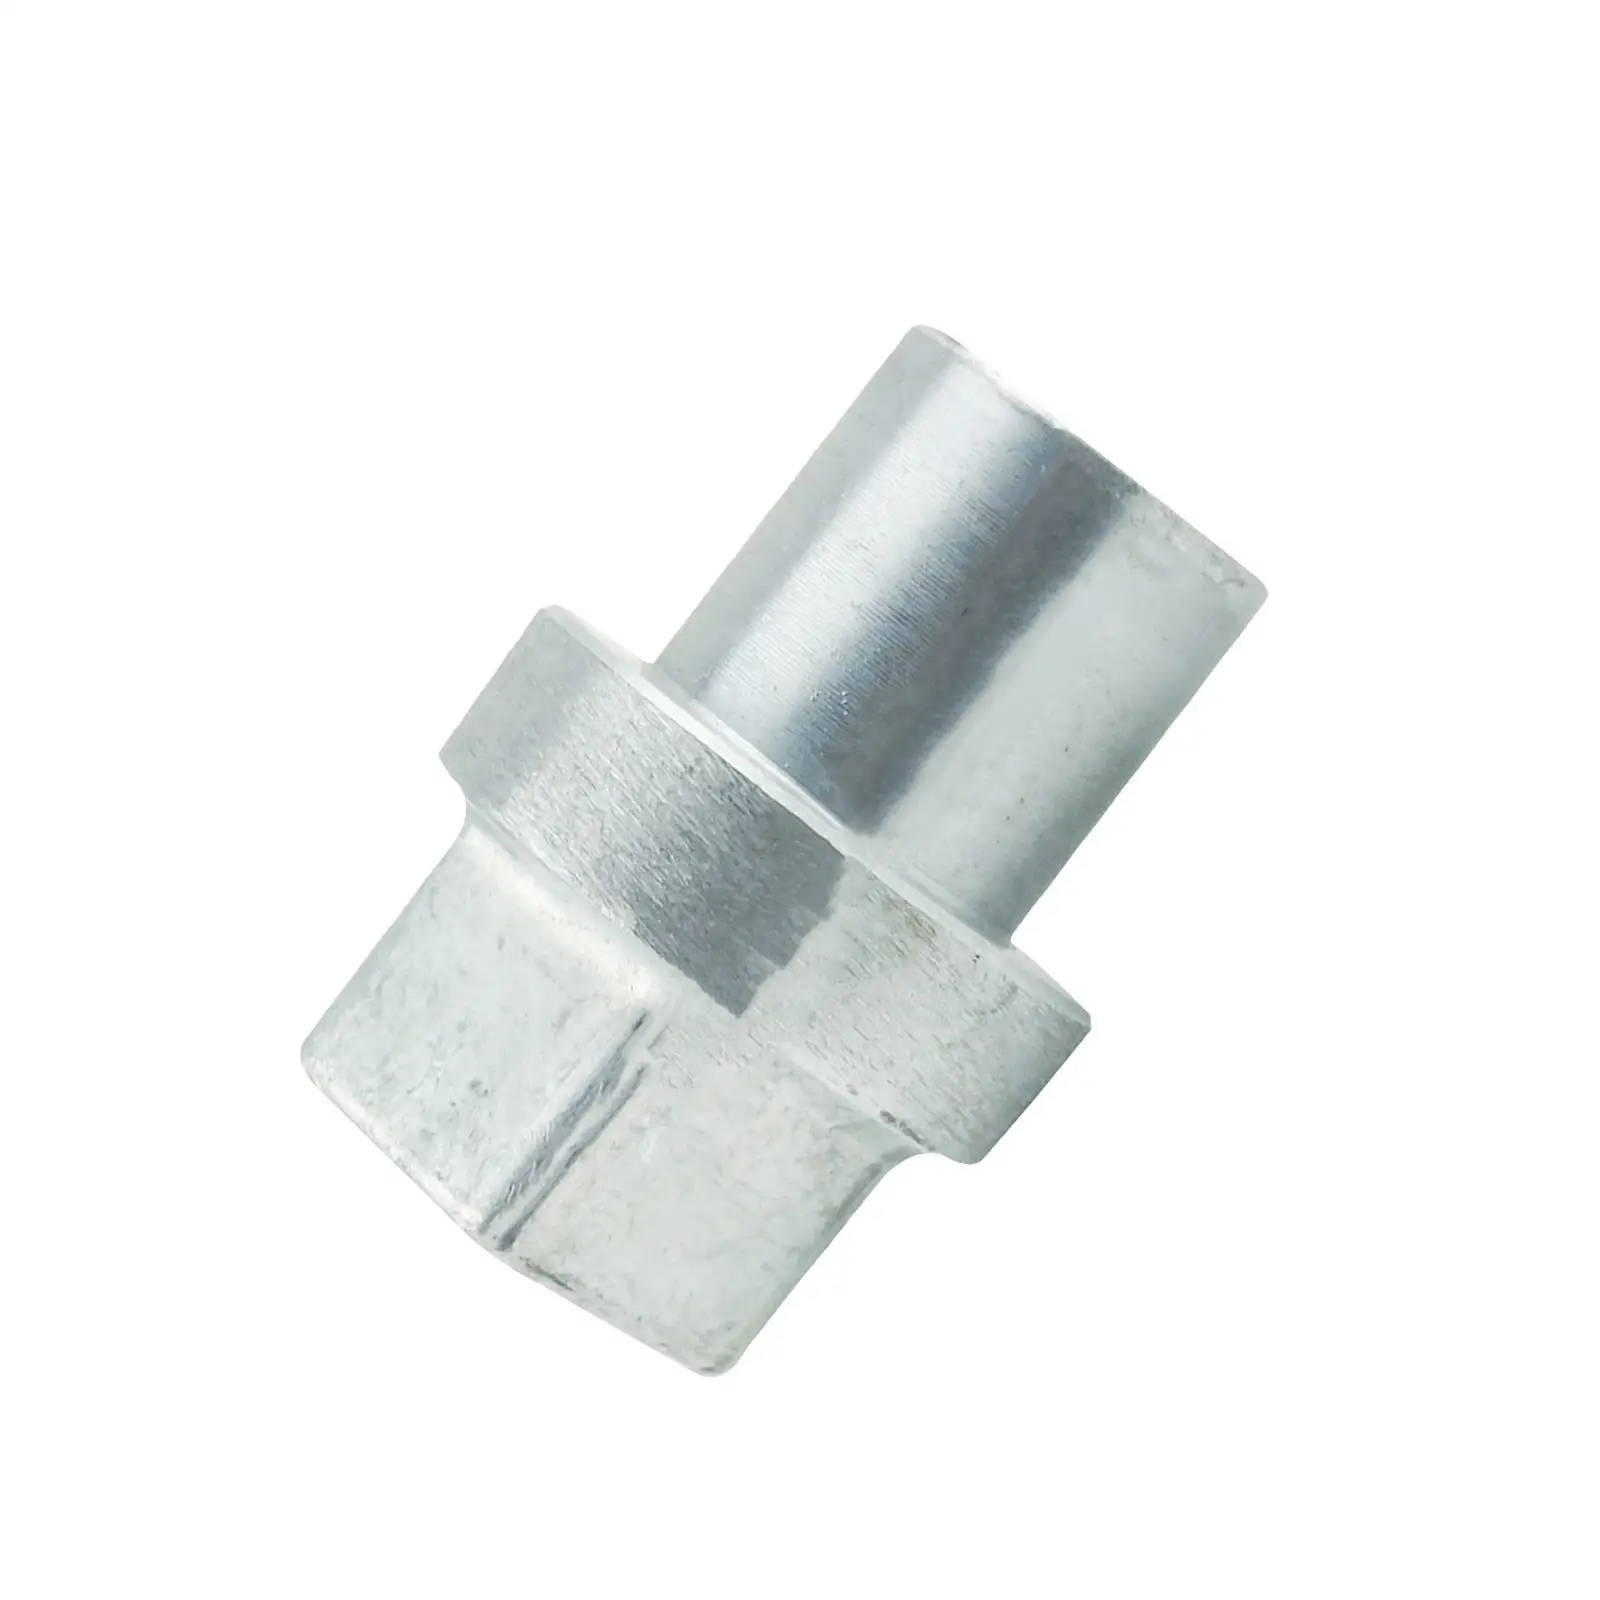 Zinc Anode 67F-45251 Metal Direct Replaces Premium Marine Engine Zinc Cylinder Anode for Yamaha 4 Stroke 80HP 100HP 200 HP